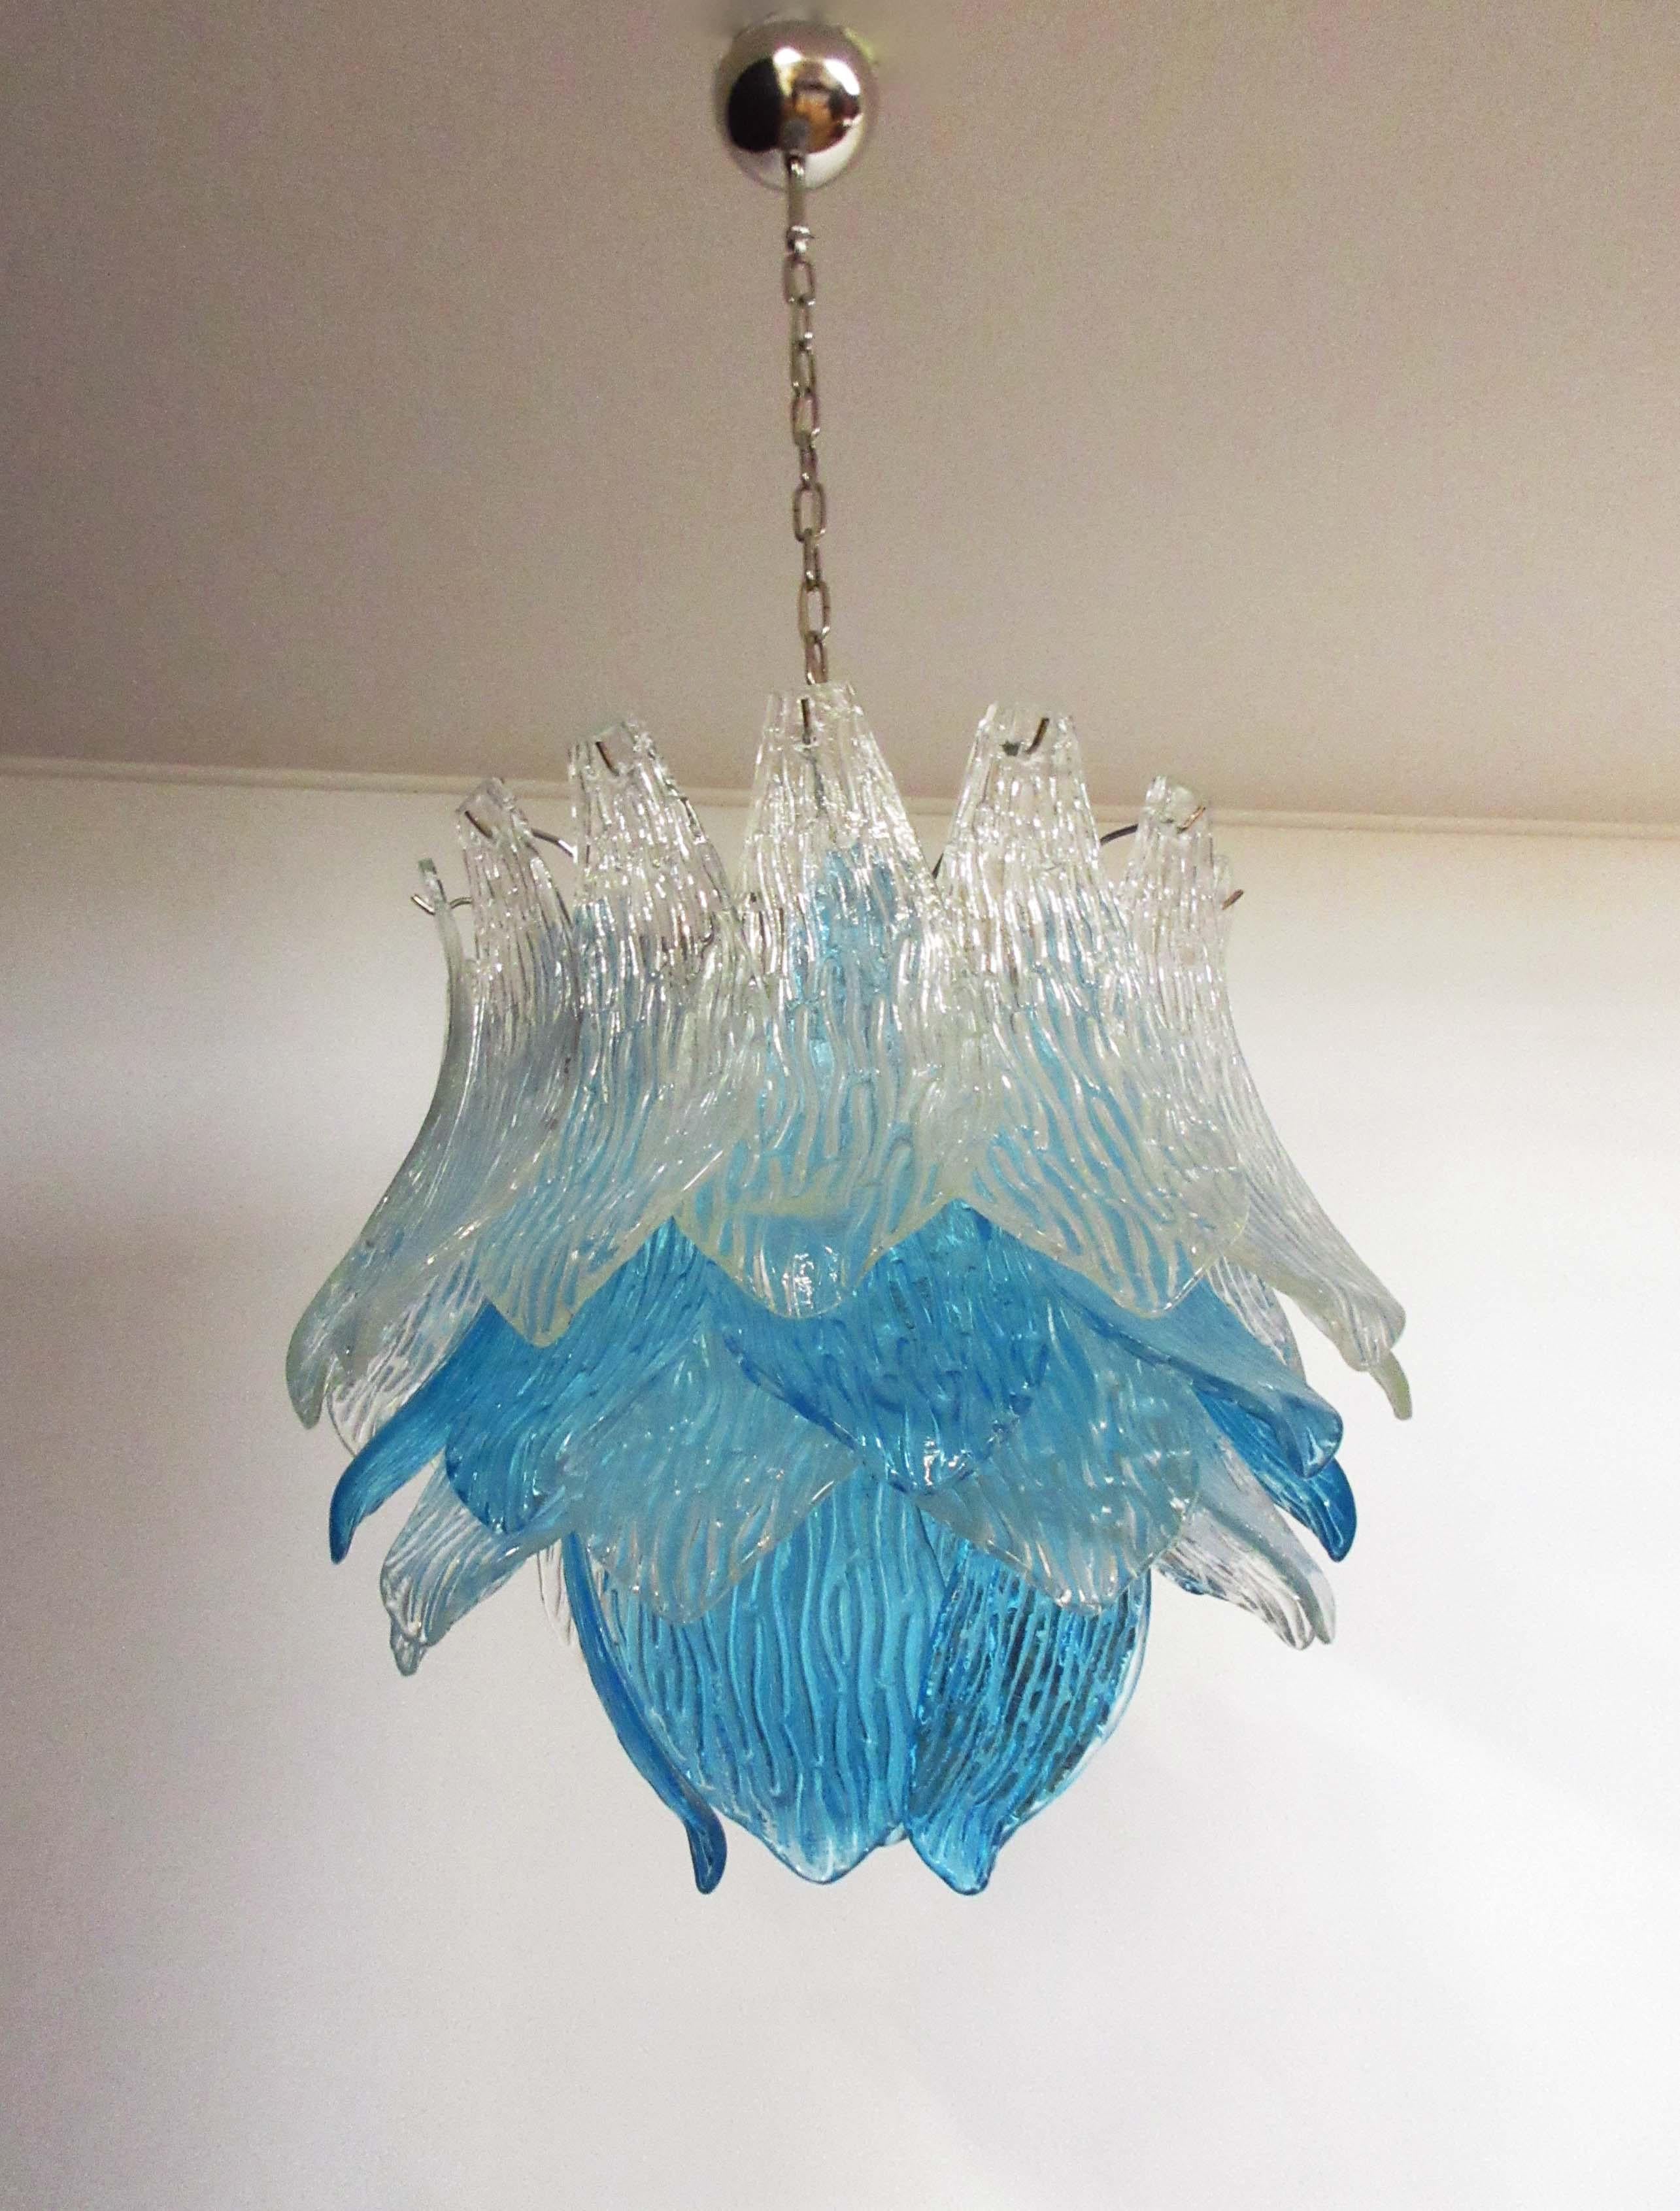 Mid-Century Modern Italian vintage Murano Glass chandelier - 38 glasses - blue and trasparent For Sale